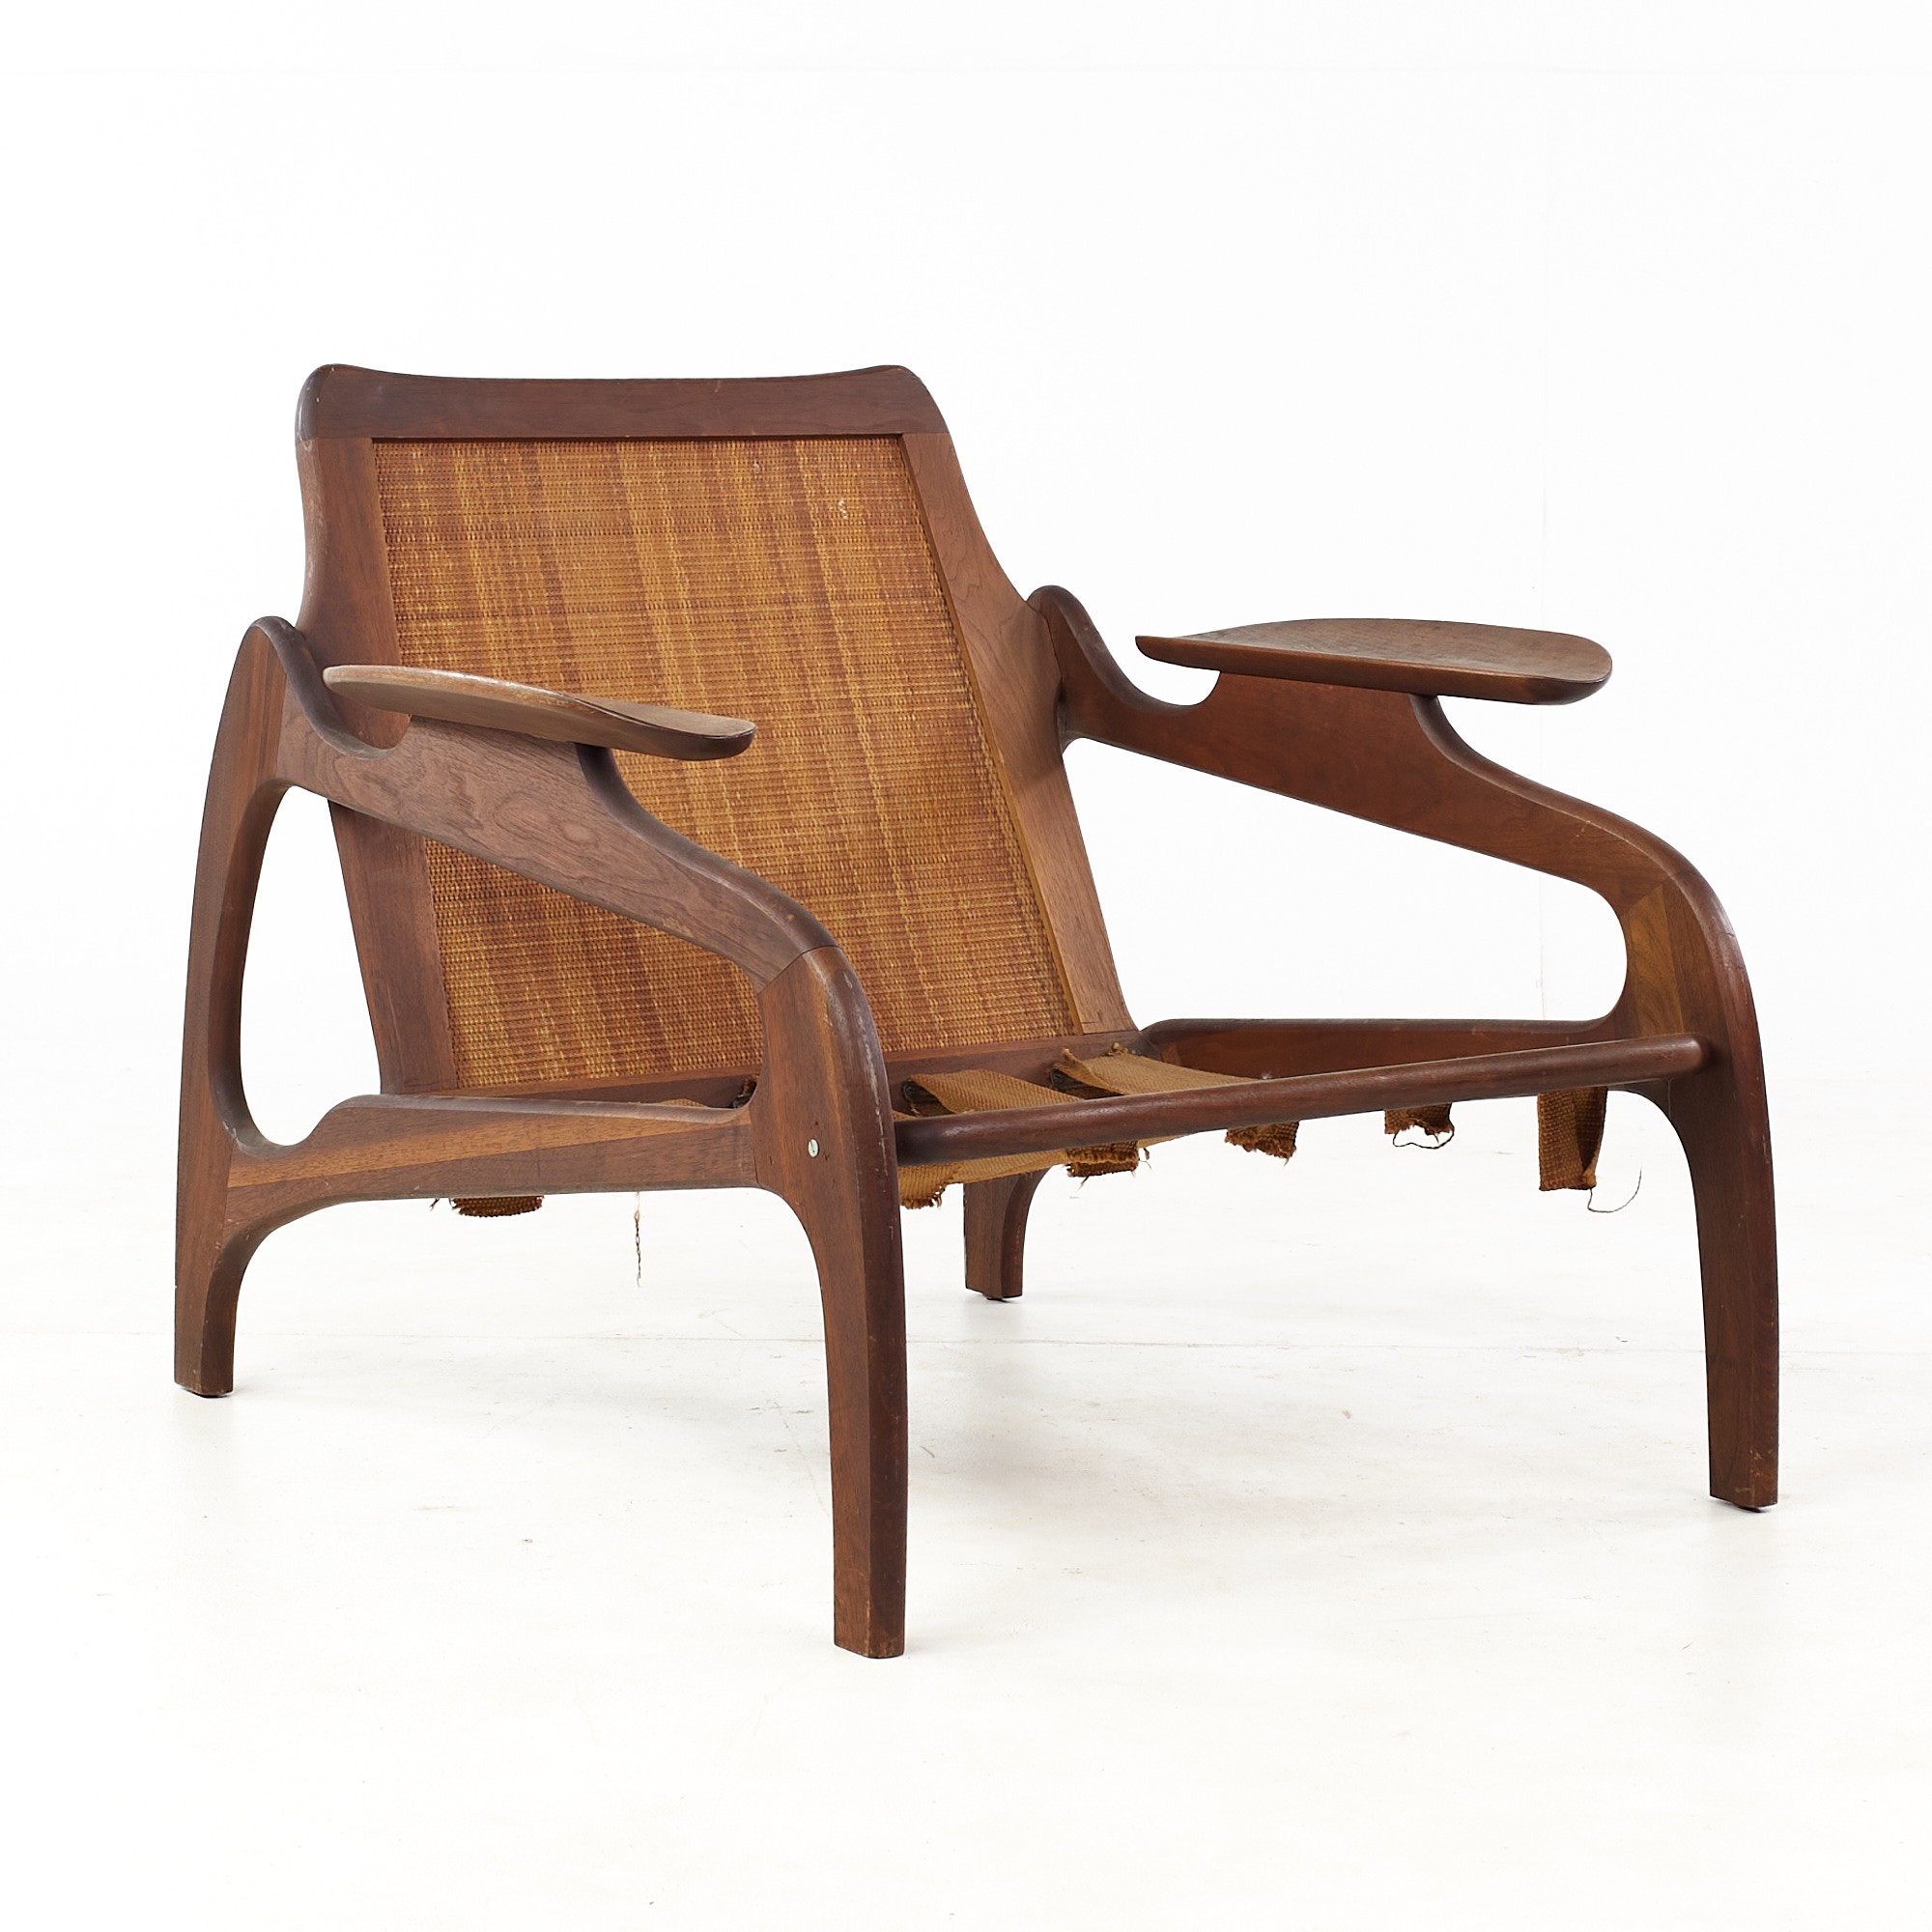 Adrian Pearsall 1209c Mid Century Walnut and Cane Lounge Chair